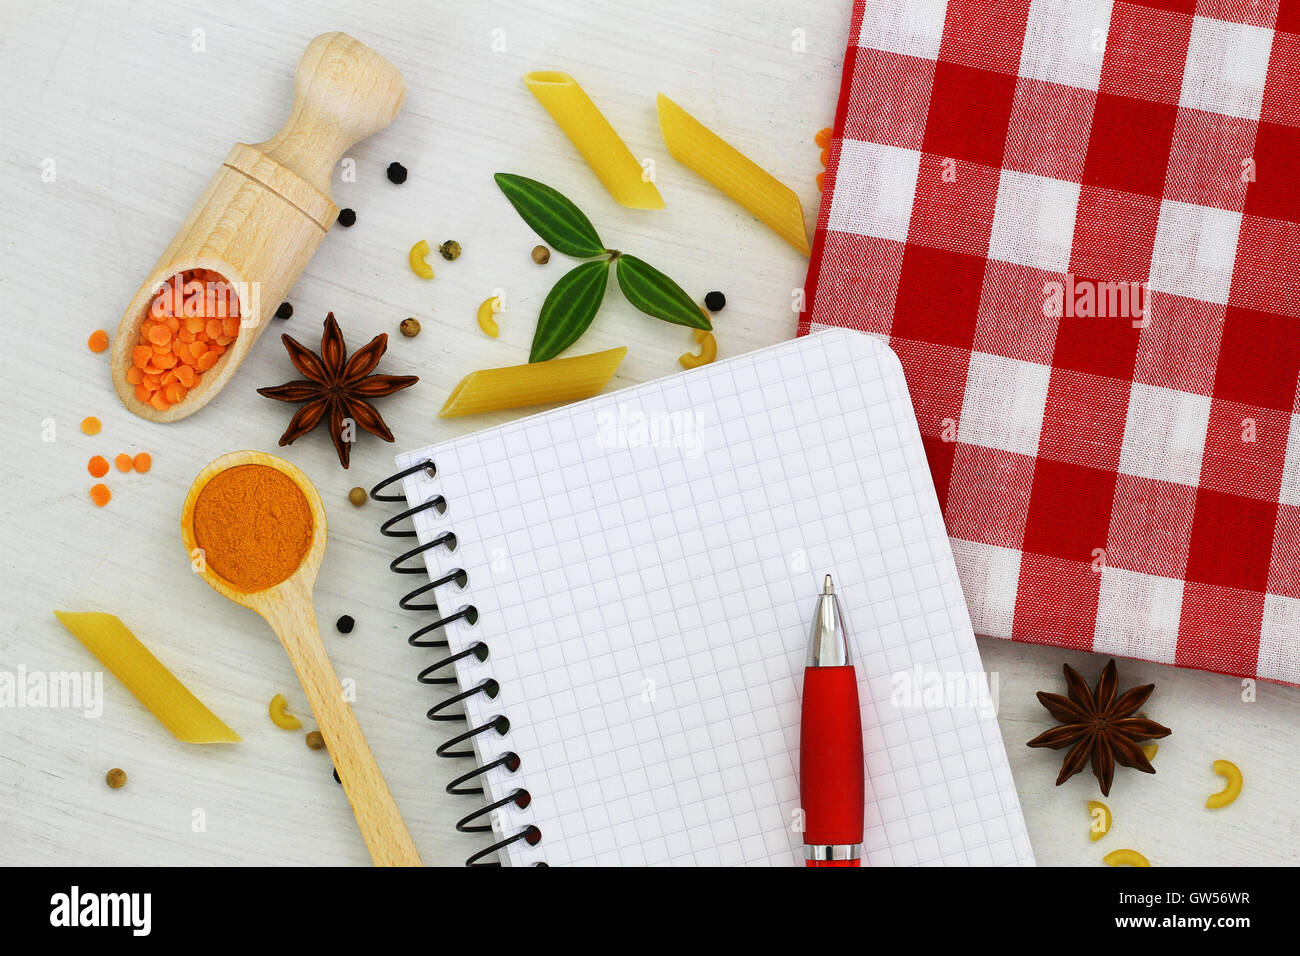 Empty notebook with pen and different ingredients spread around it Stock Photo